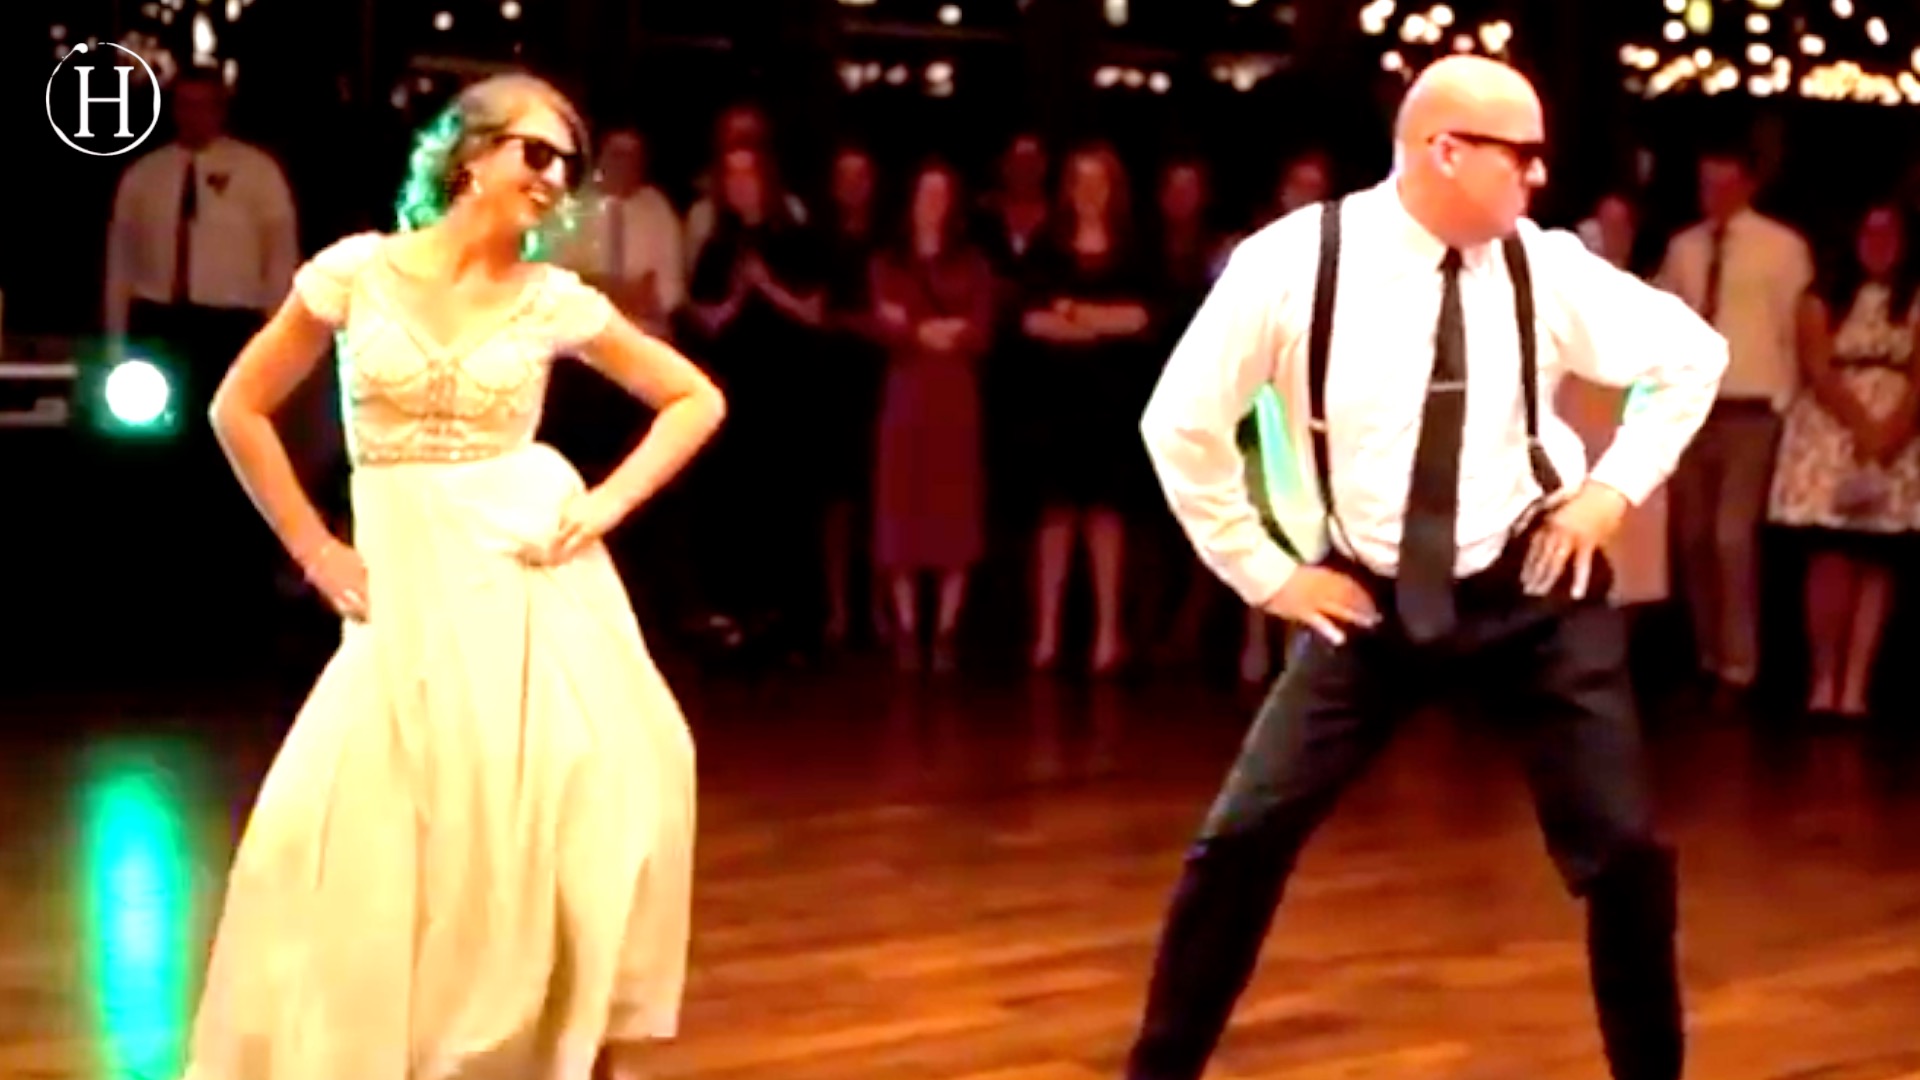 Father and Daughter Surprise Wedding Guests With Epic Dance Routine | Humanity Life